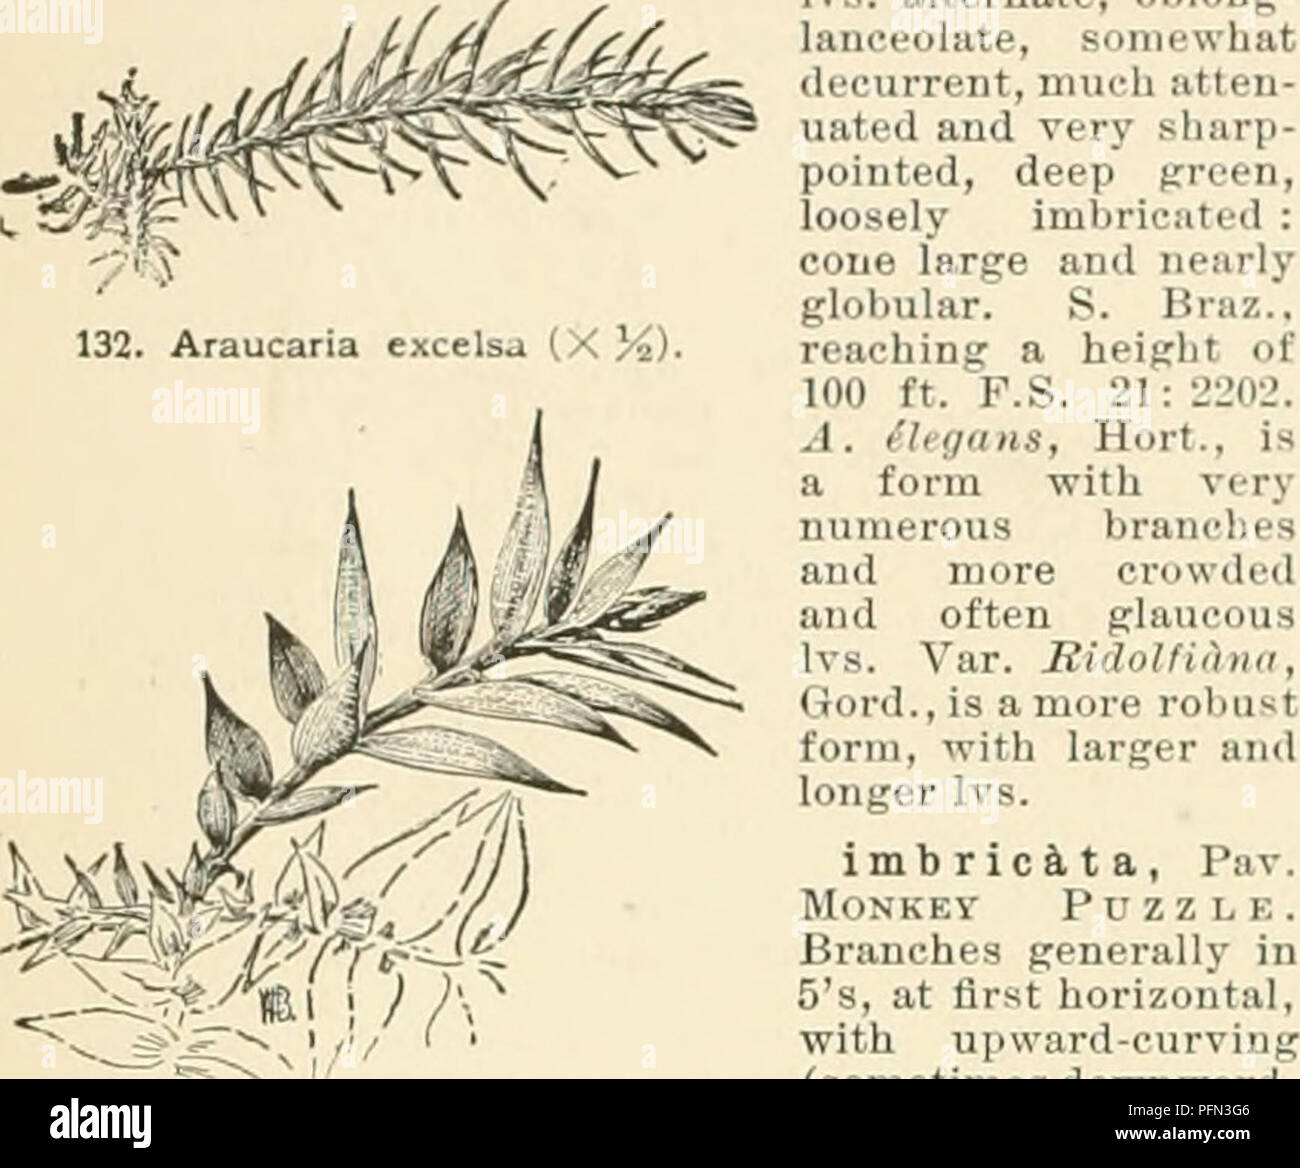 . Cyclopedia of American horticulture, comprising suggestions for cultivation of horticultural plants, descriptions of the species of fruits, vegetables, flowers, and ornamental plants sold in the United States and Canada, together with geographical and biographical sketches. Gardening. 90 ARAUCARIA 150 ft., and is known as Bungaliunga. R.H. 1897, p. 500. G.C. III. 15: 405, showing tUe piueapple-like cone. âOne of the best and handsomest species for pot cul- ture. Brazili&amp;na, A. Rich. Branches verticillate, somewhat inclined, rai.^ed at the ends, tending to disappear below as the plant gro Stock Photo